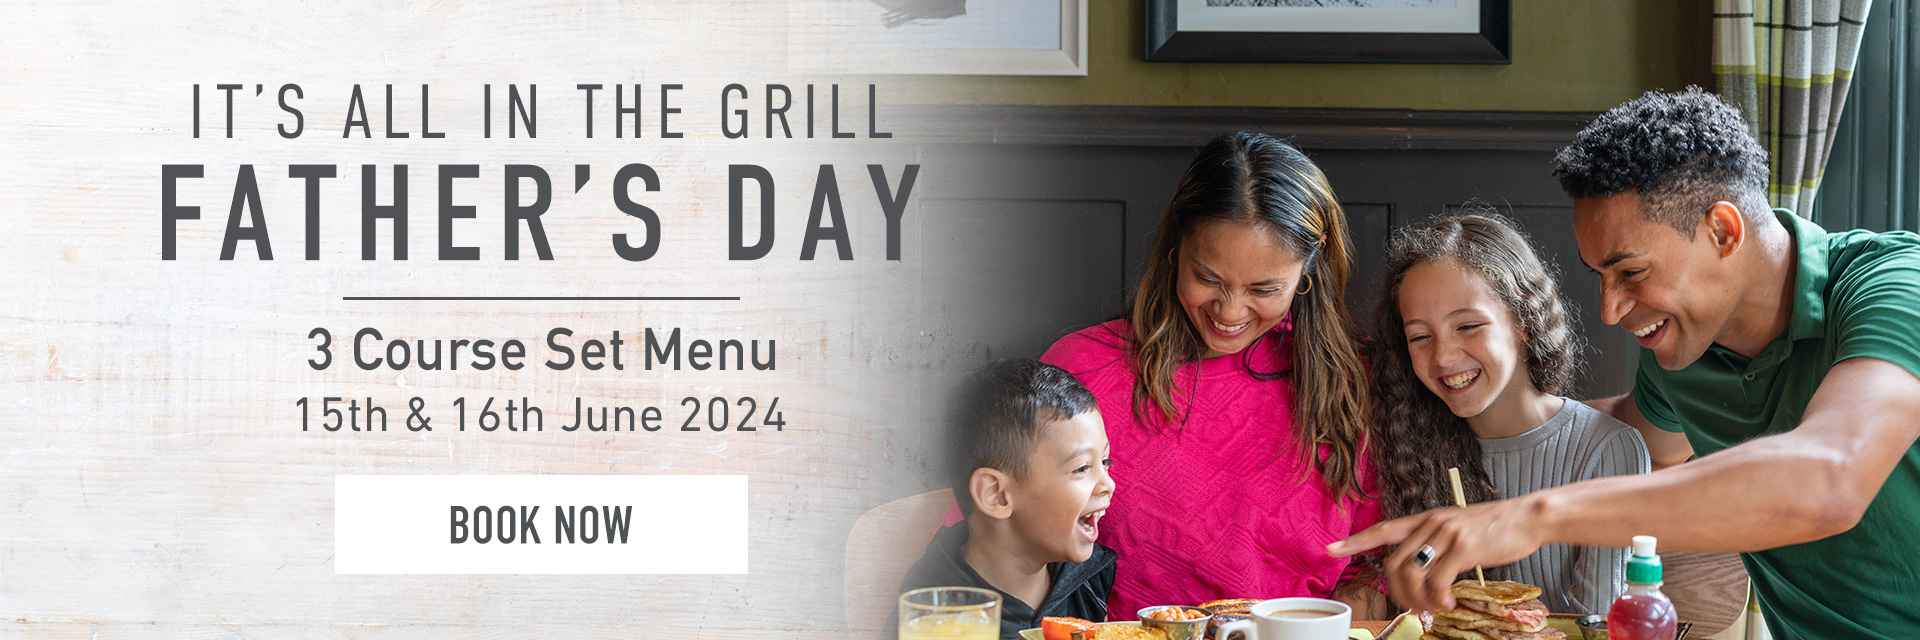 Father’s Day at Harvester Grays